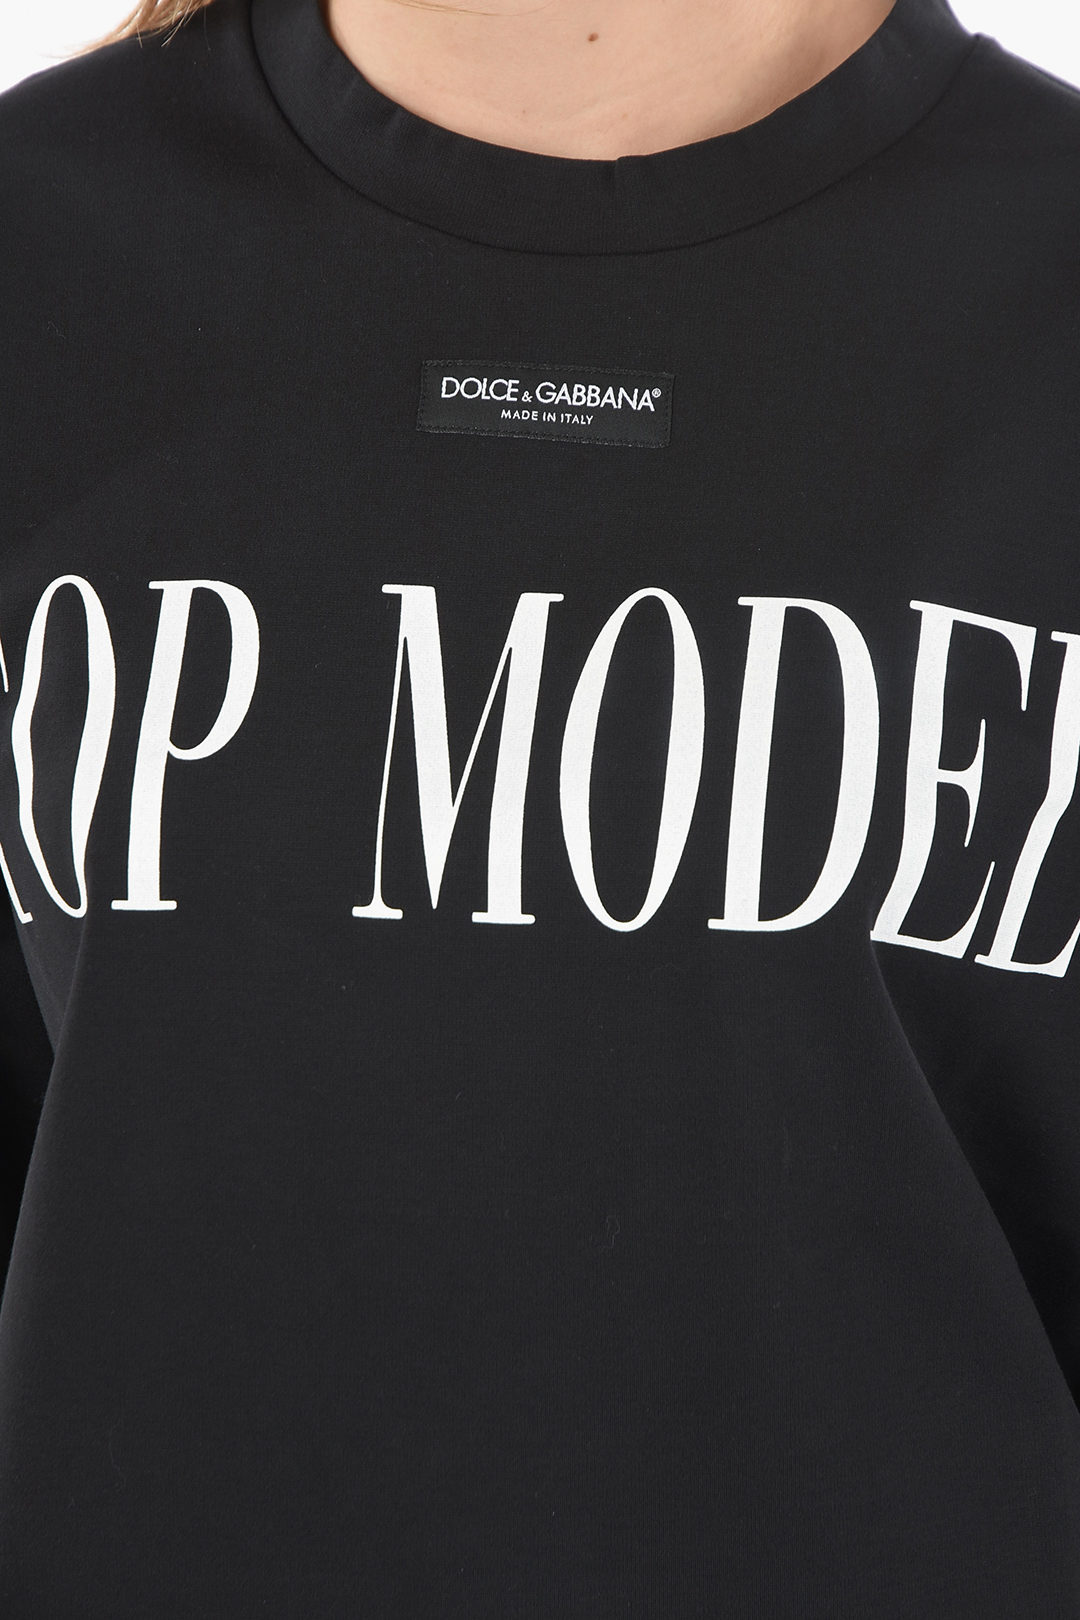 & women with Lettering Gabbana MODEL Glamood Print Dolce T-shirt - Crewneck Outlet TOP